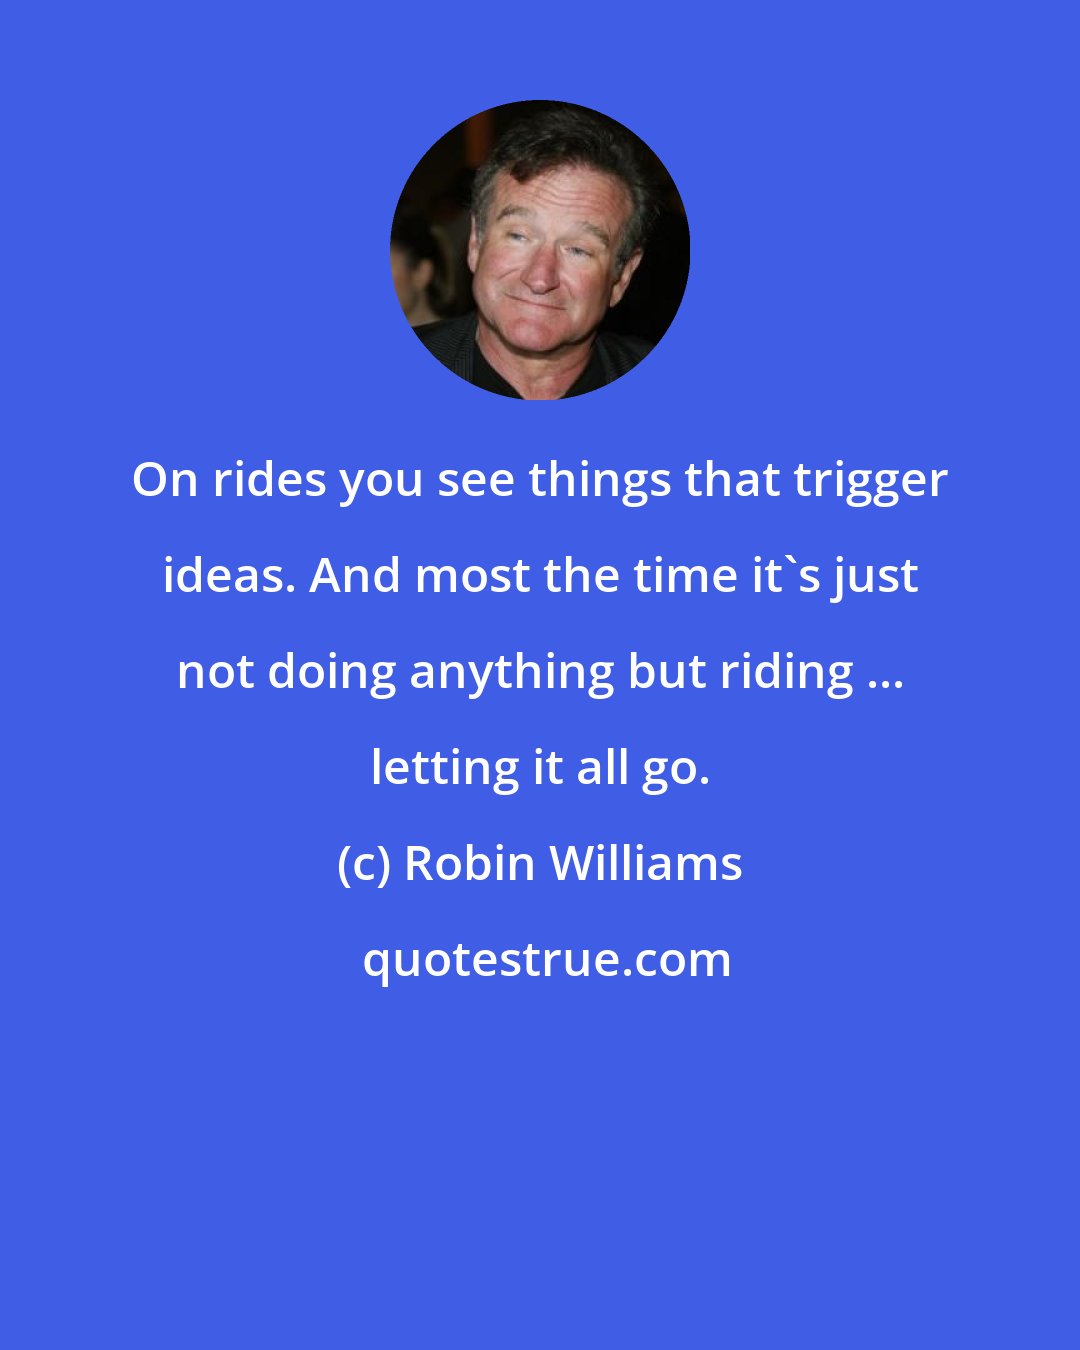 Robin Williams: On rides you see things that trigger ideas. And most the time it's just not doing anything but riding ... letting it all go.